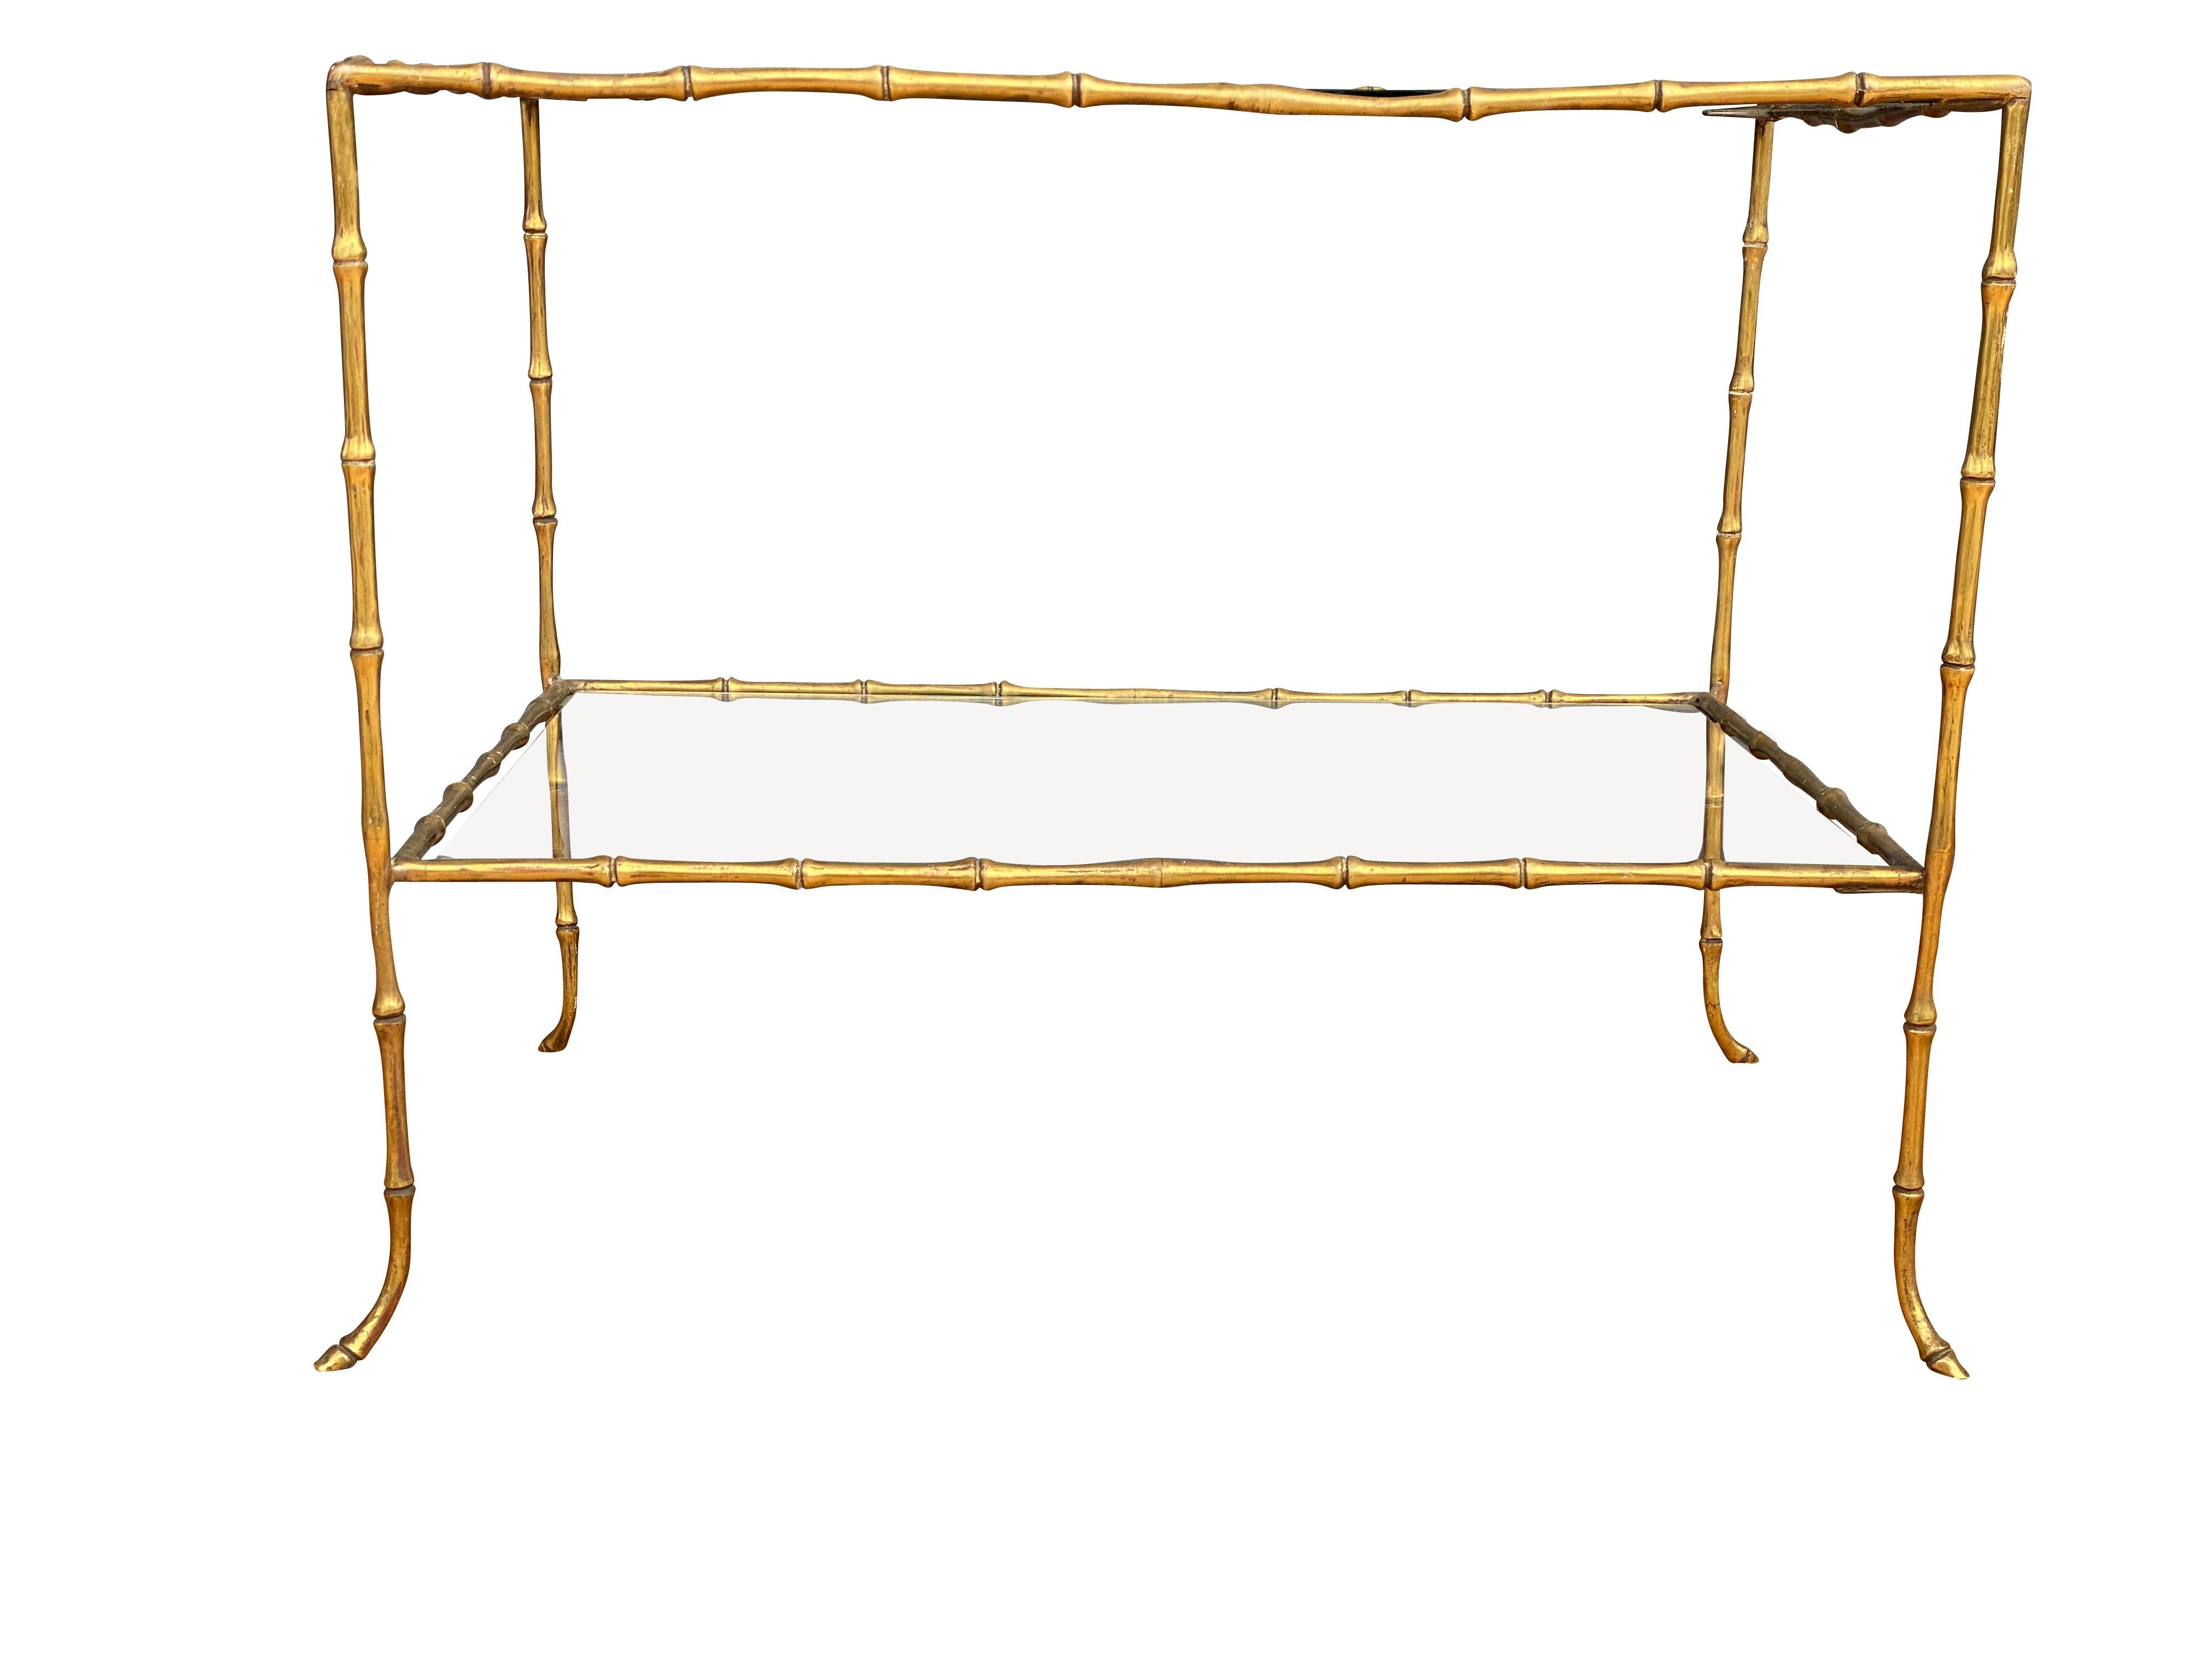 Rectangular with clear glass insert with conforming lower tier, curved conforming feet. Provenance; William Hodgins Inc. Boston.